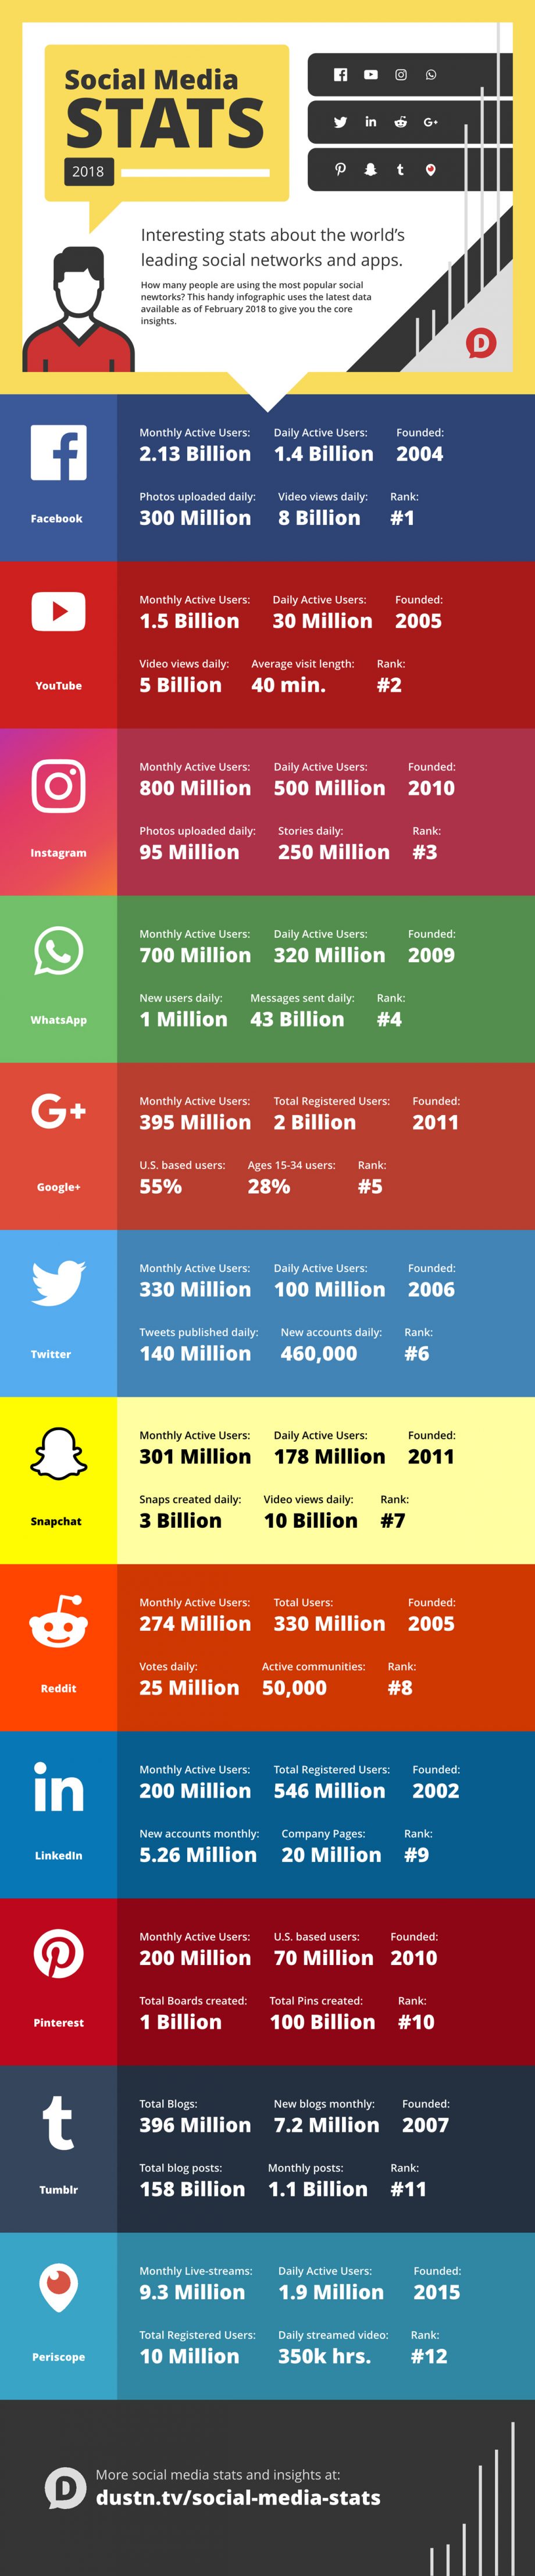 infographic with social media stats for 2018